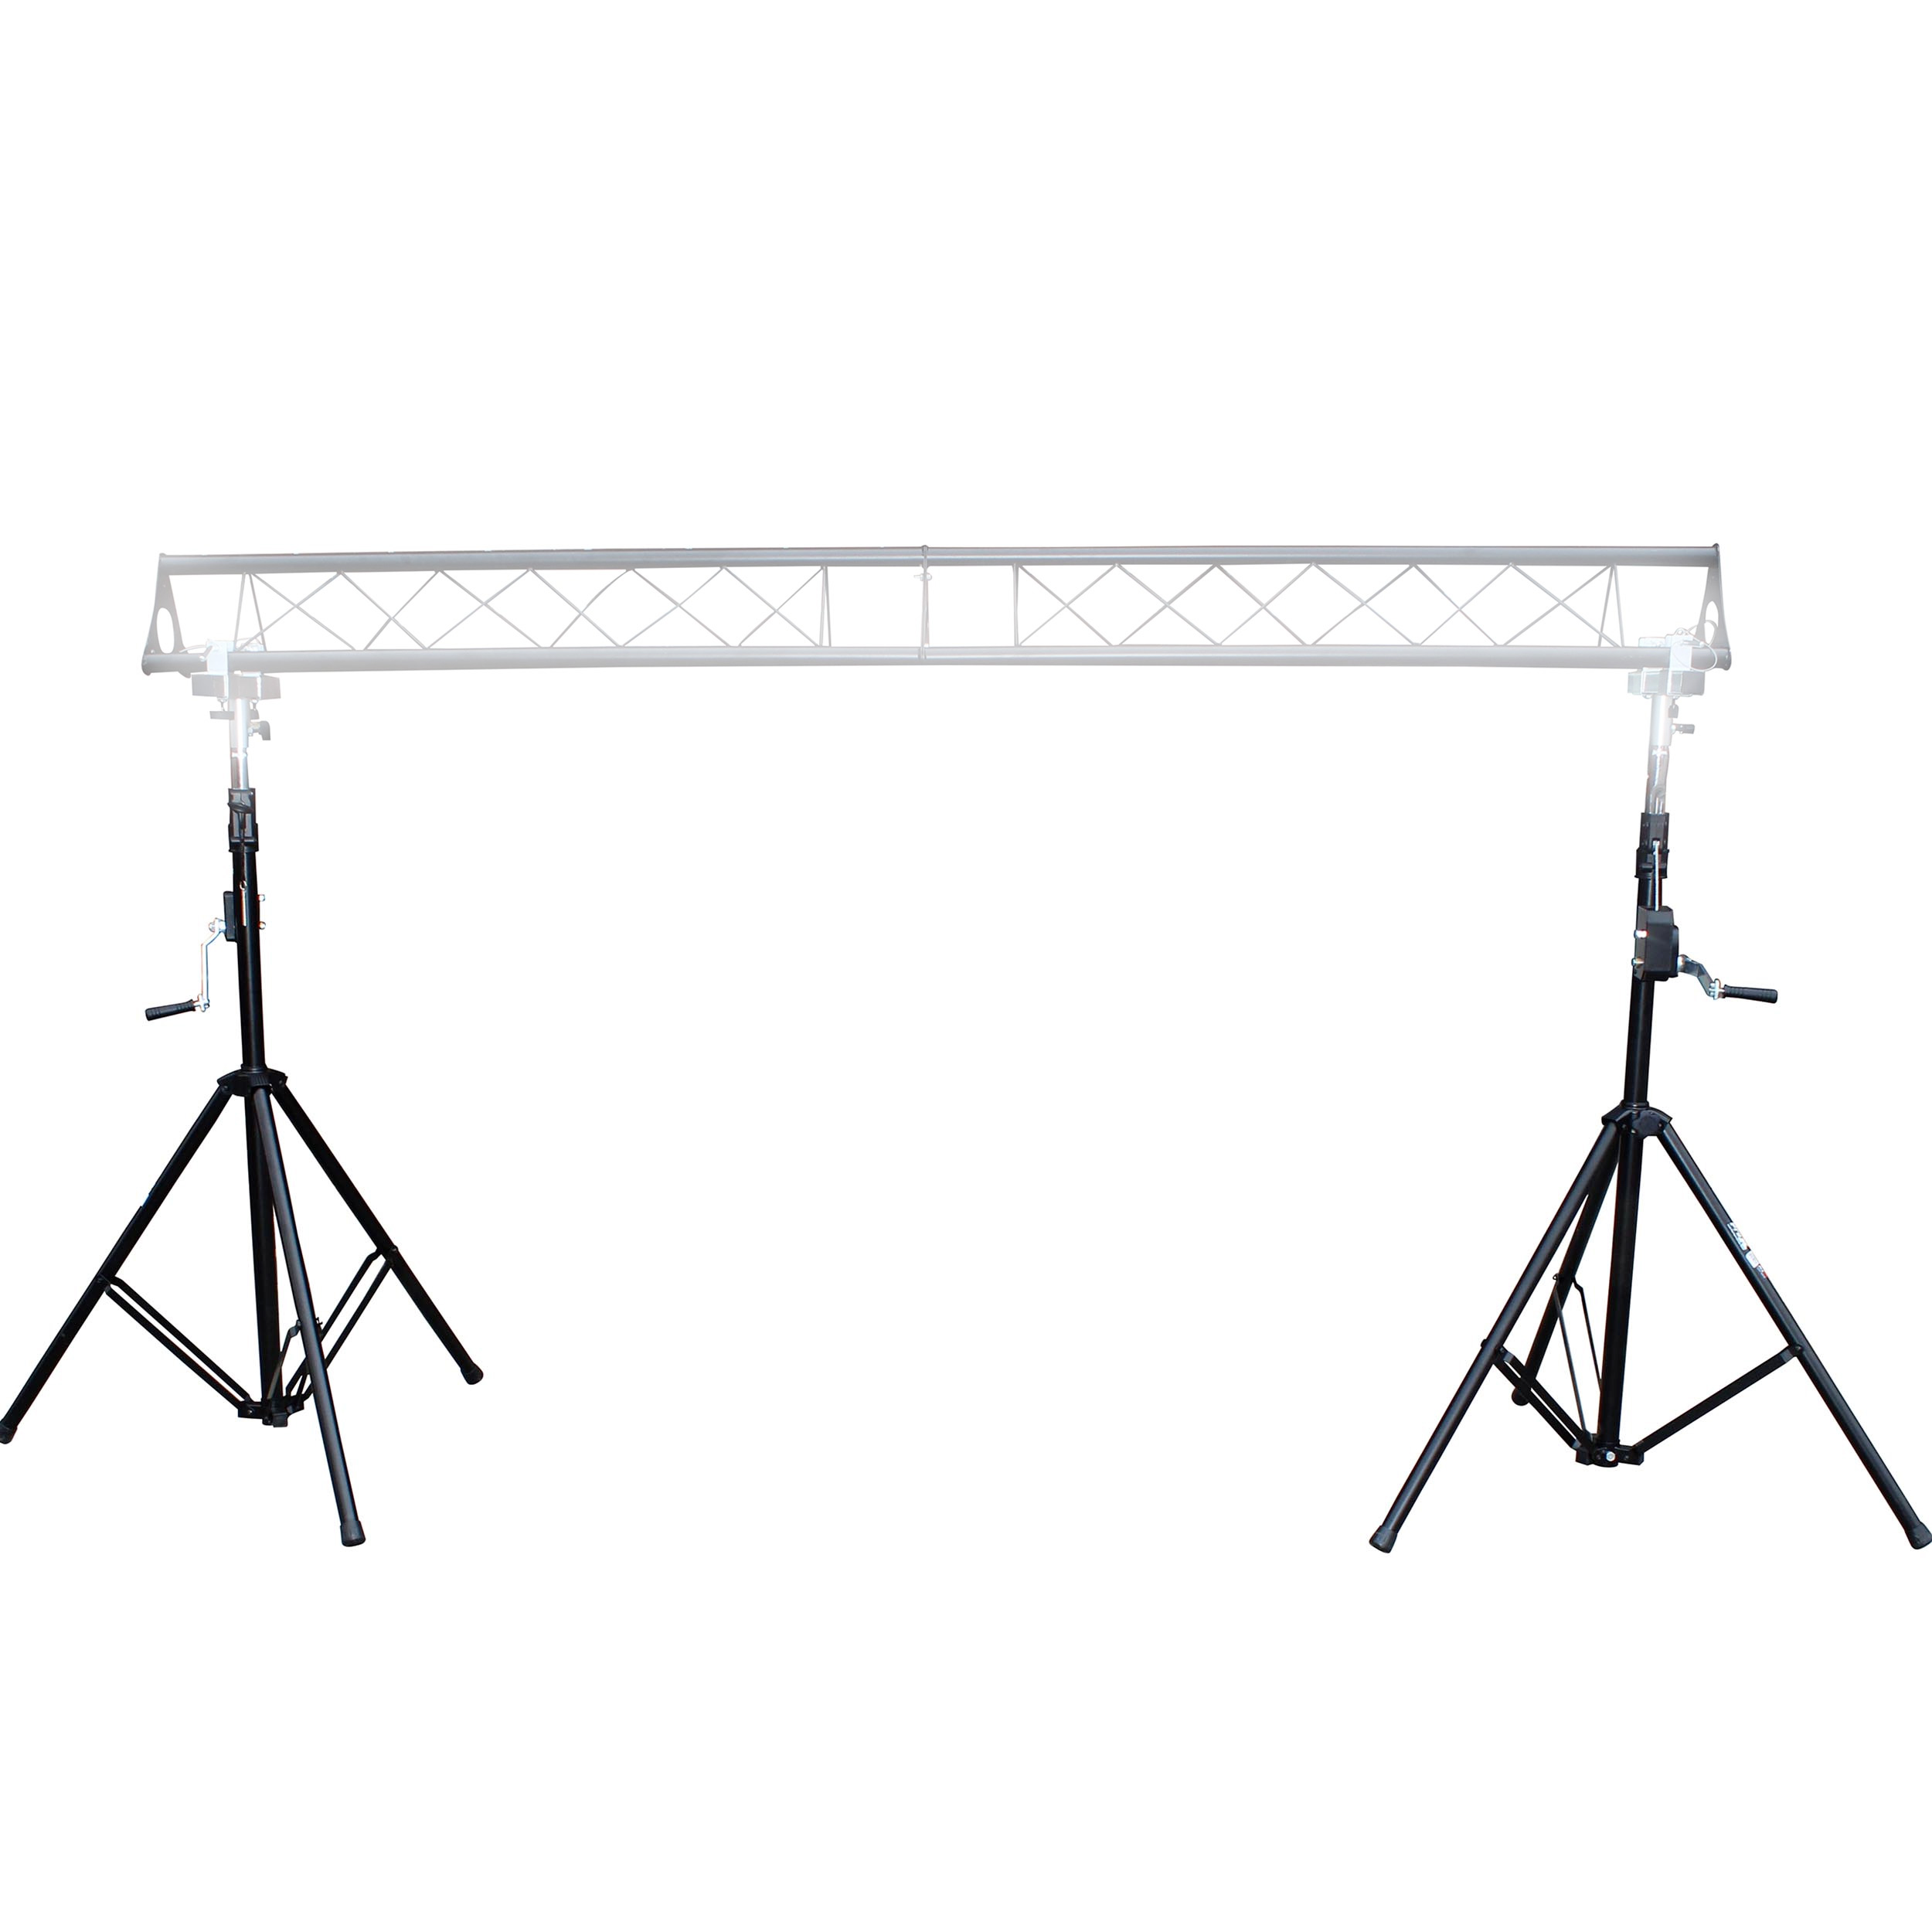 Pair of Two 9.5 Ft 3.5 M Triangle Truss DJ Lighting Crank Up Stands